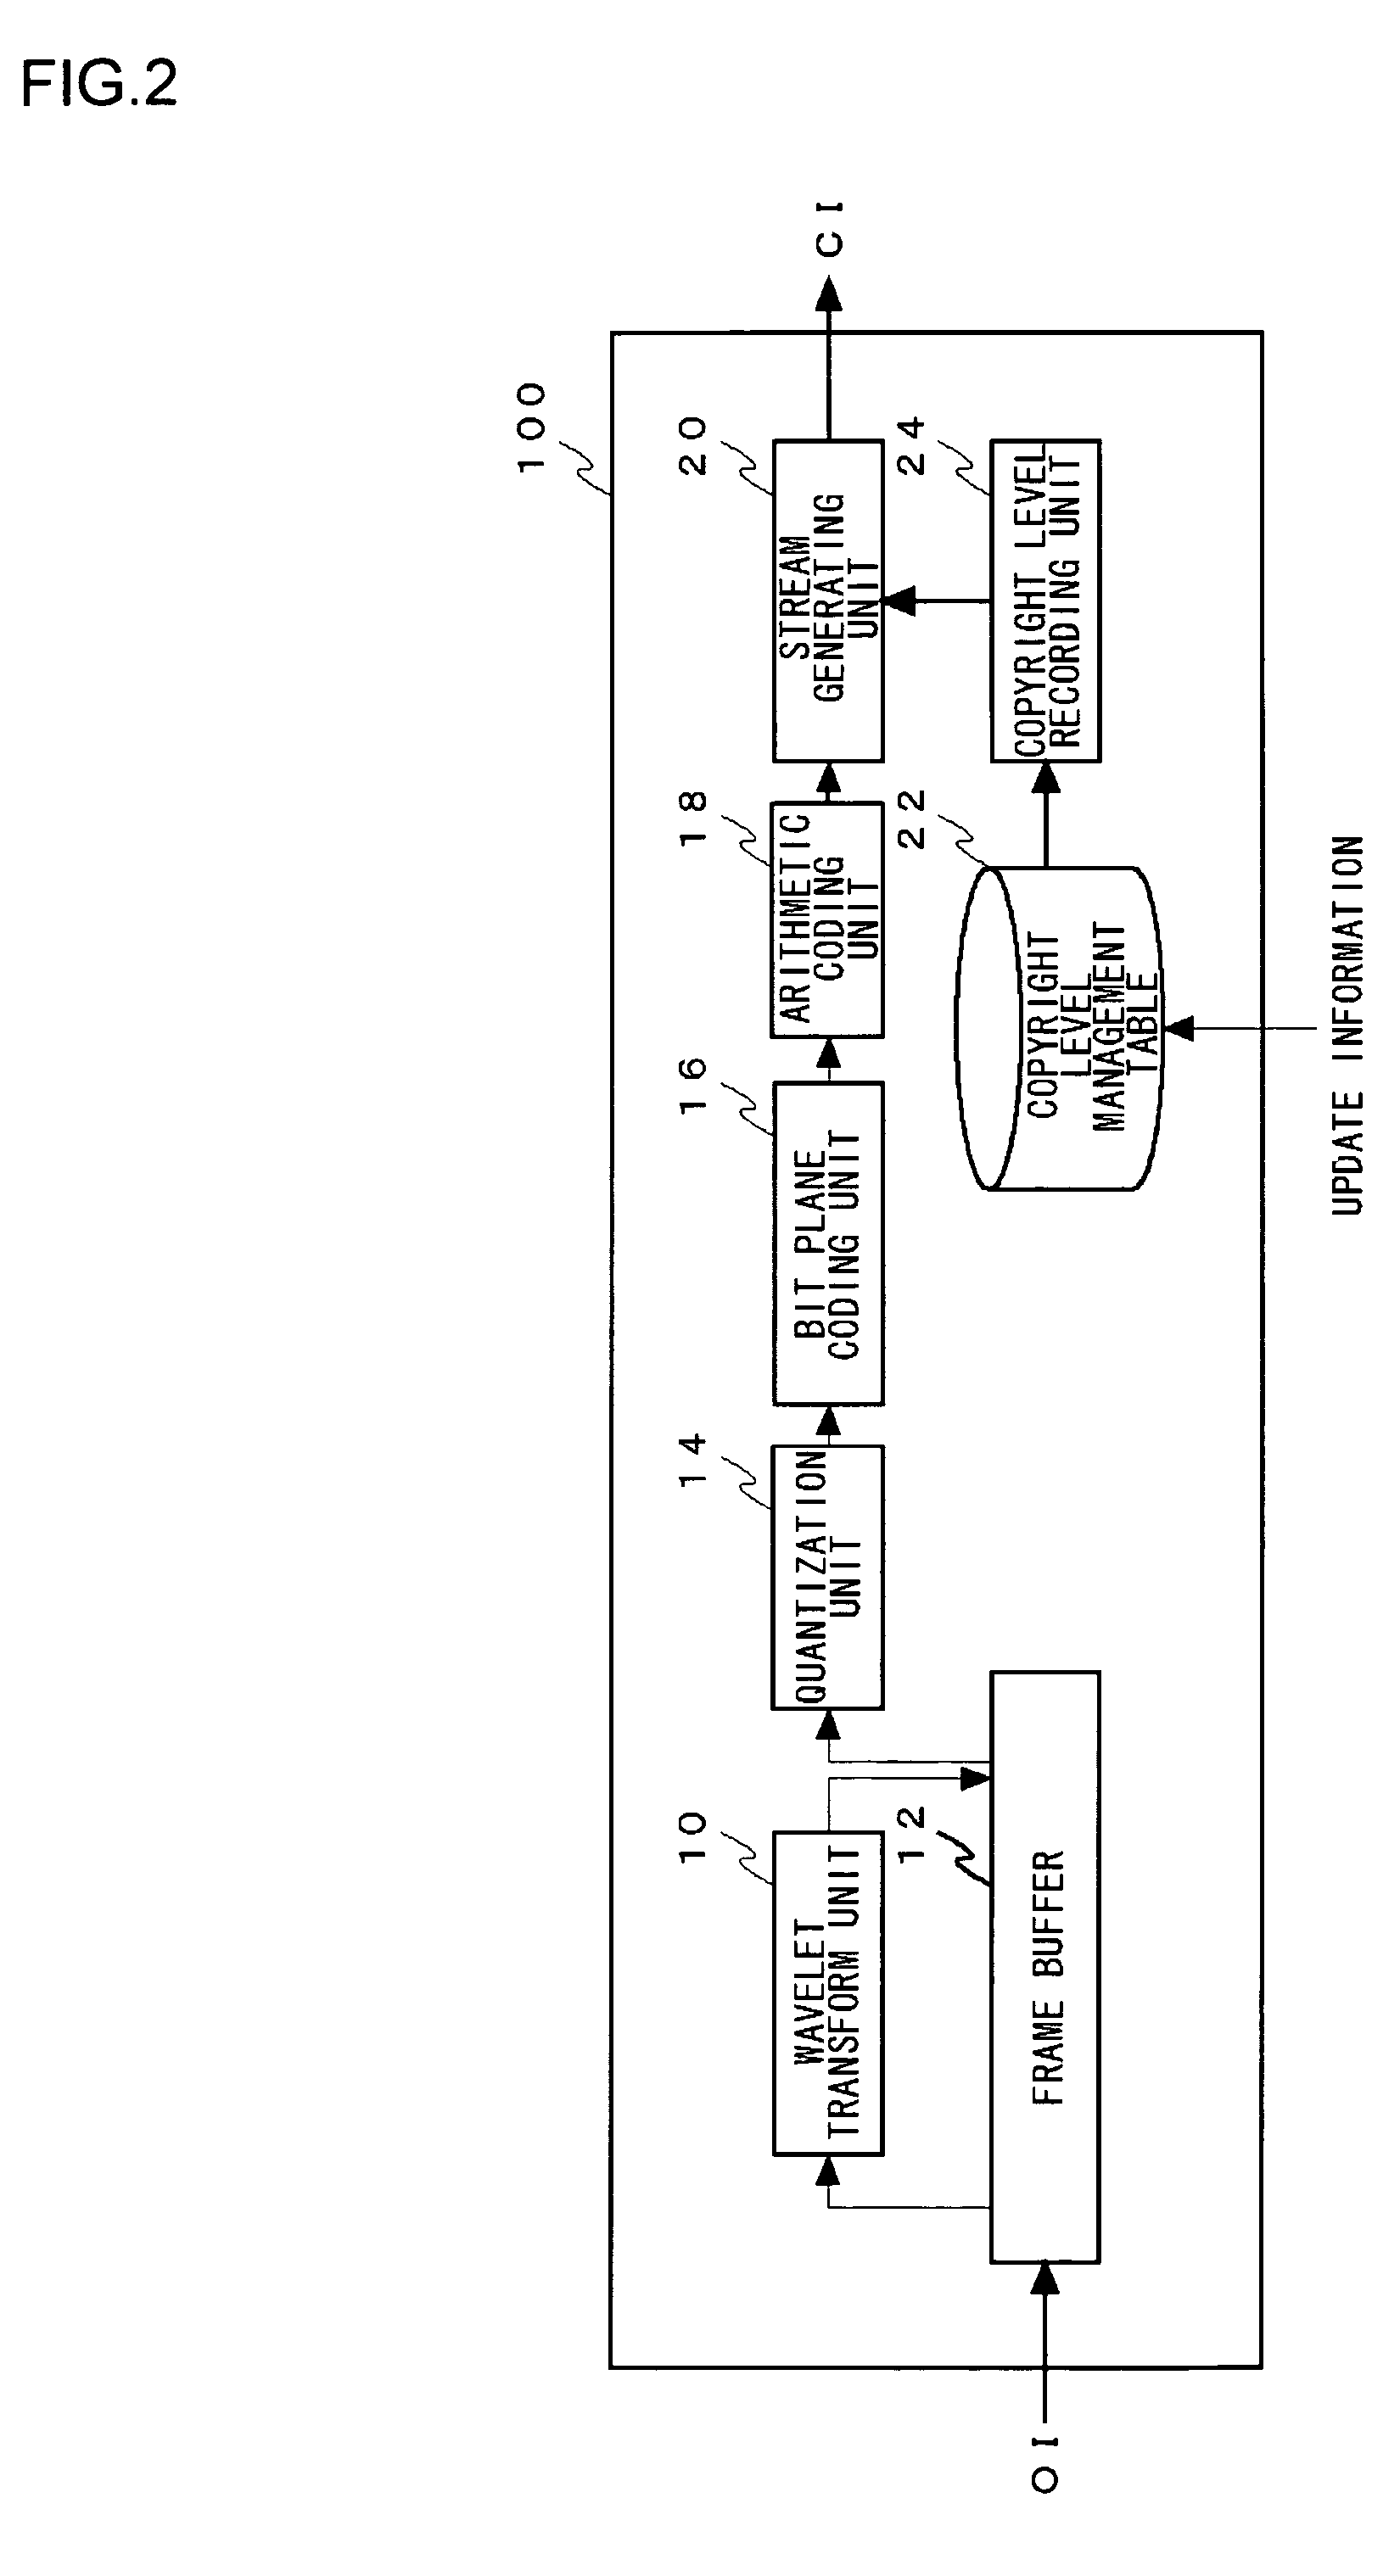 Image processing apparatus and method for processing image having hierarchical structure